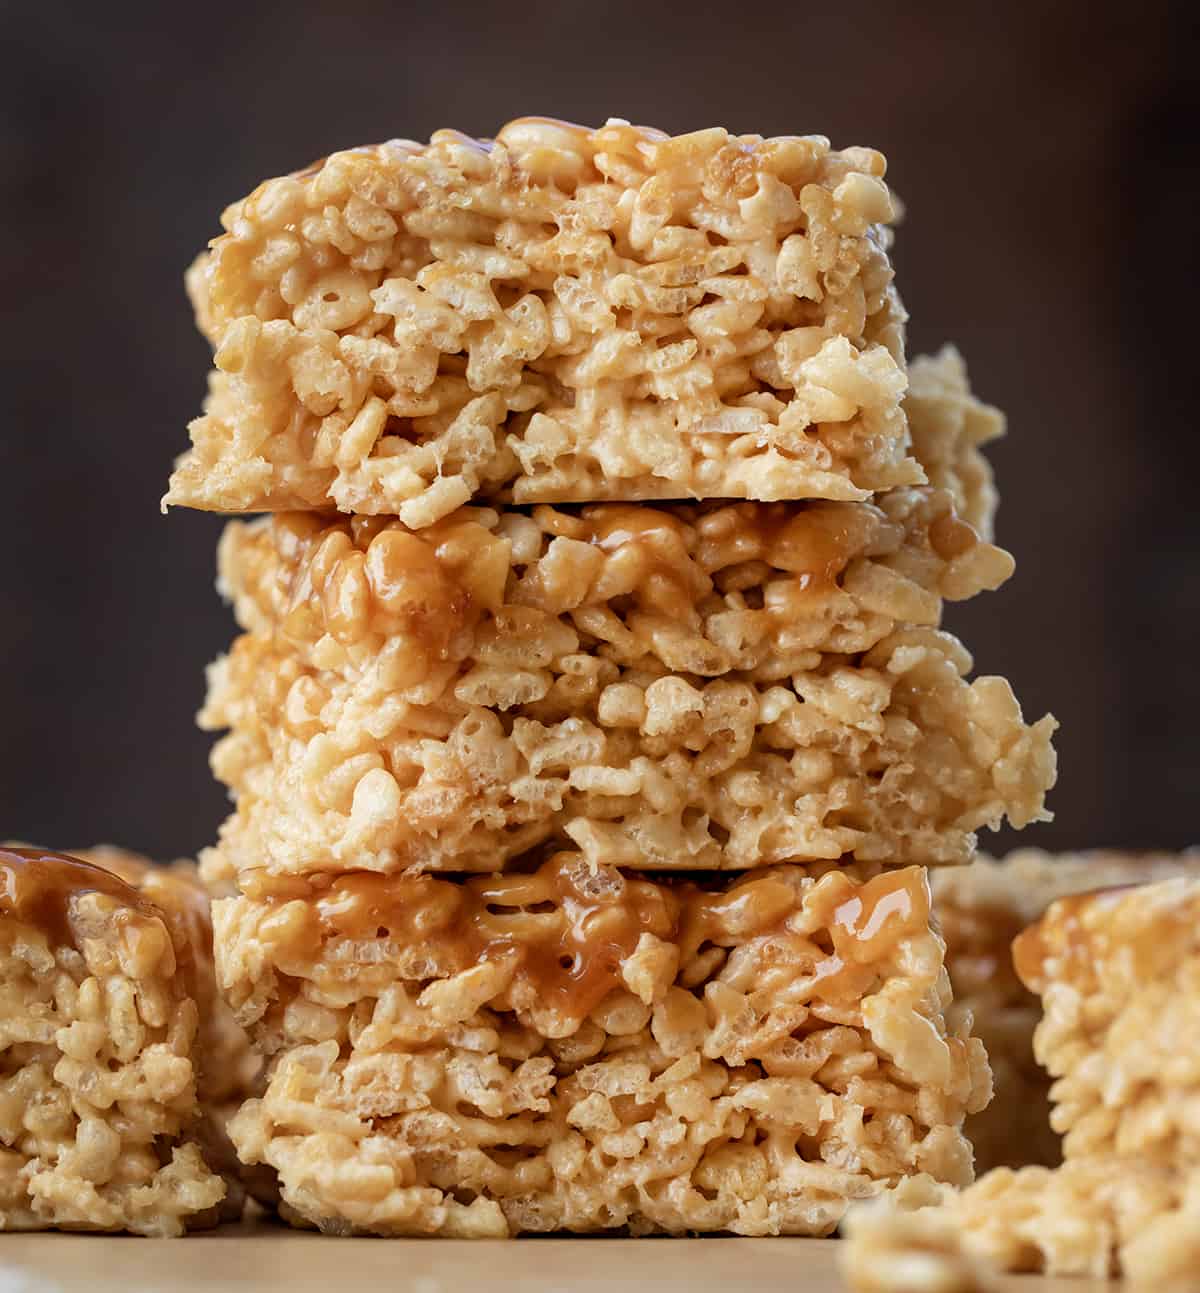 Stack of Salted Caramel Rice Krispie Treats on a wooden table.